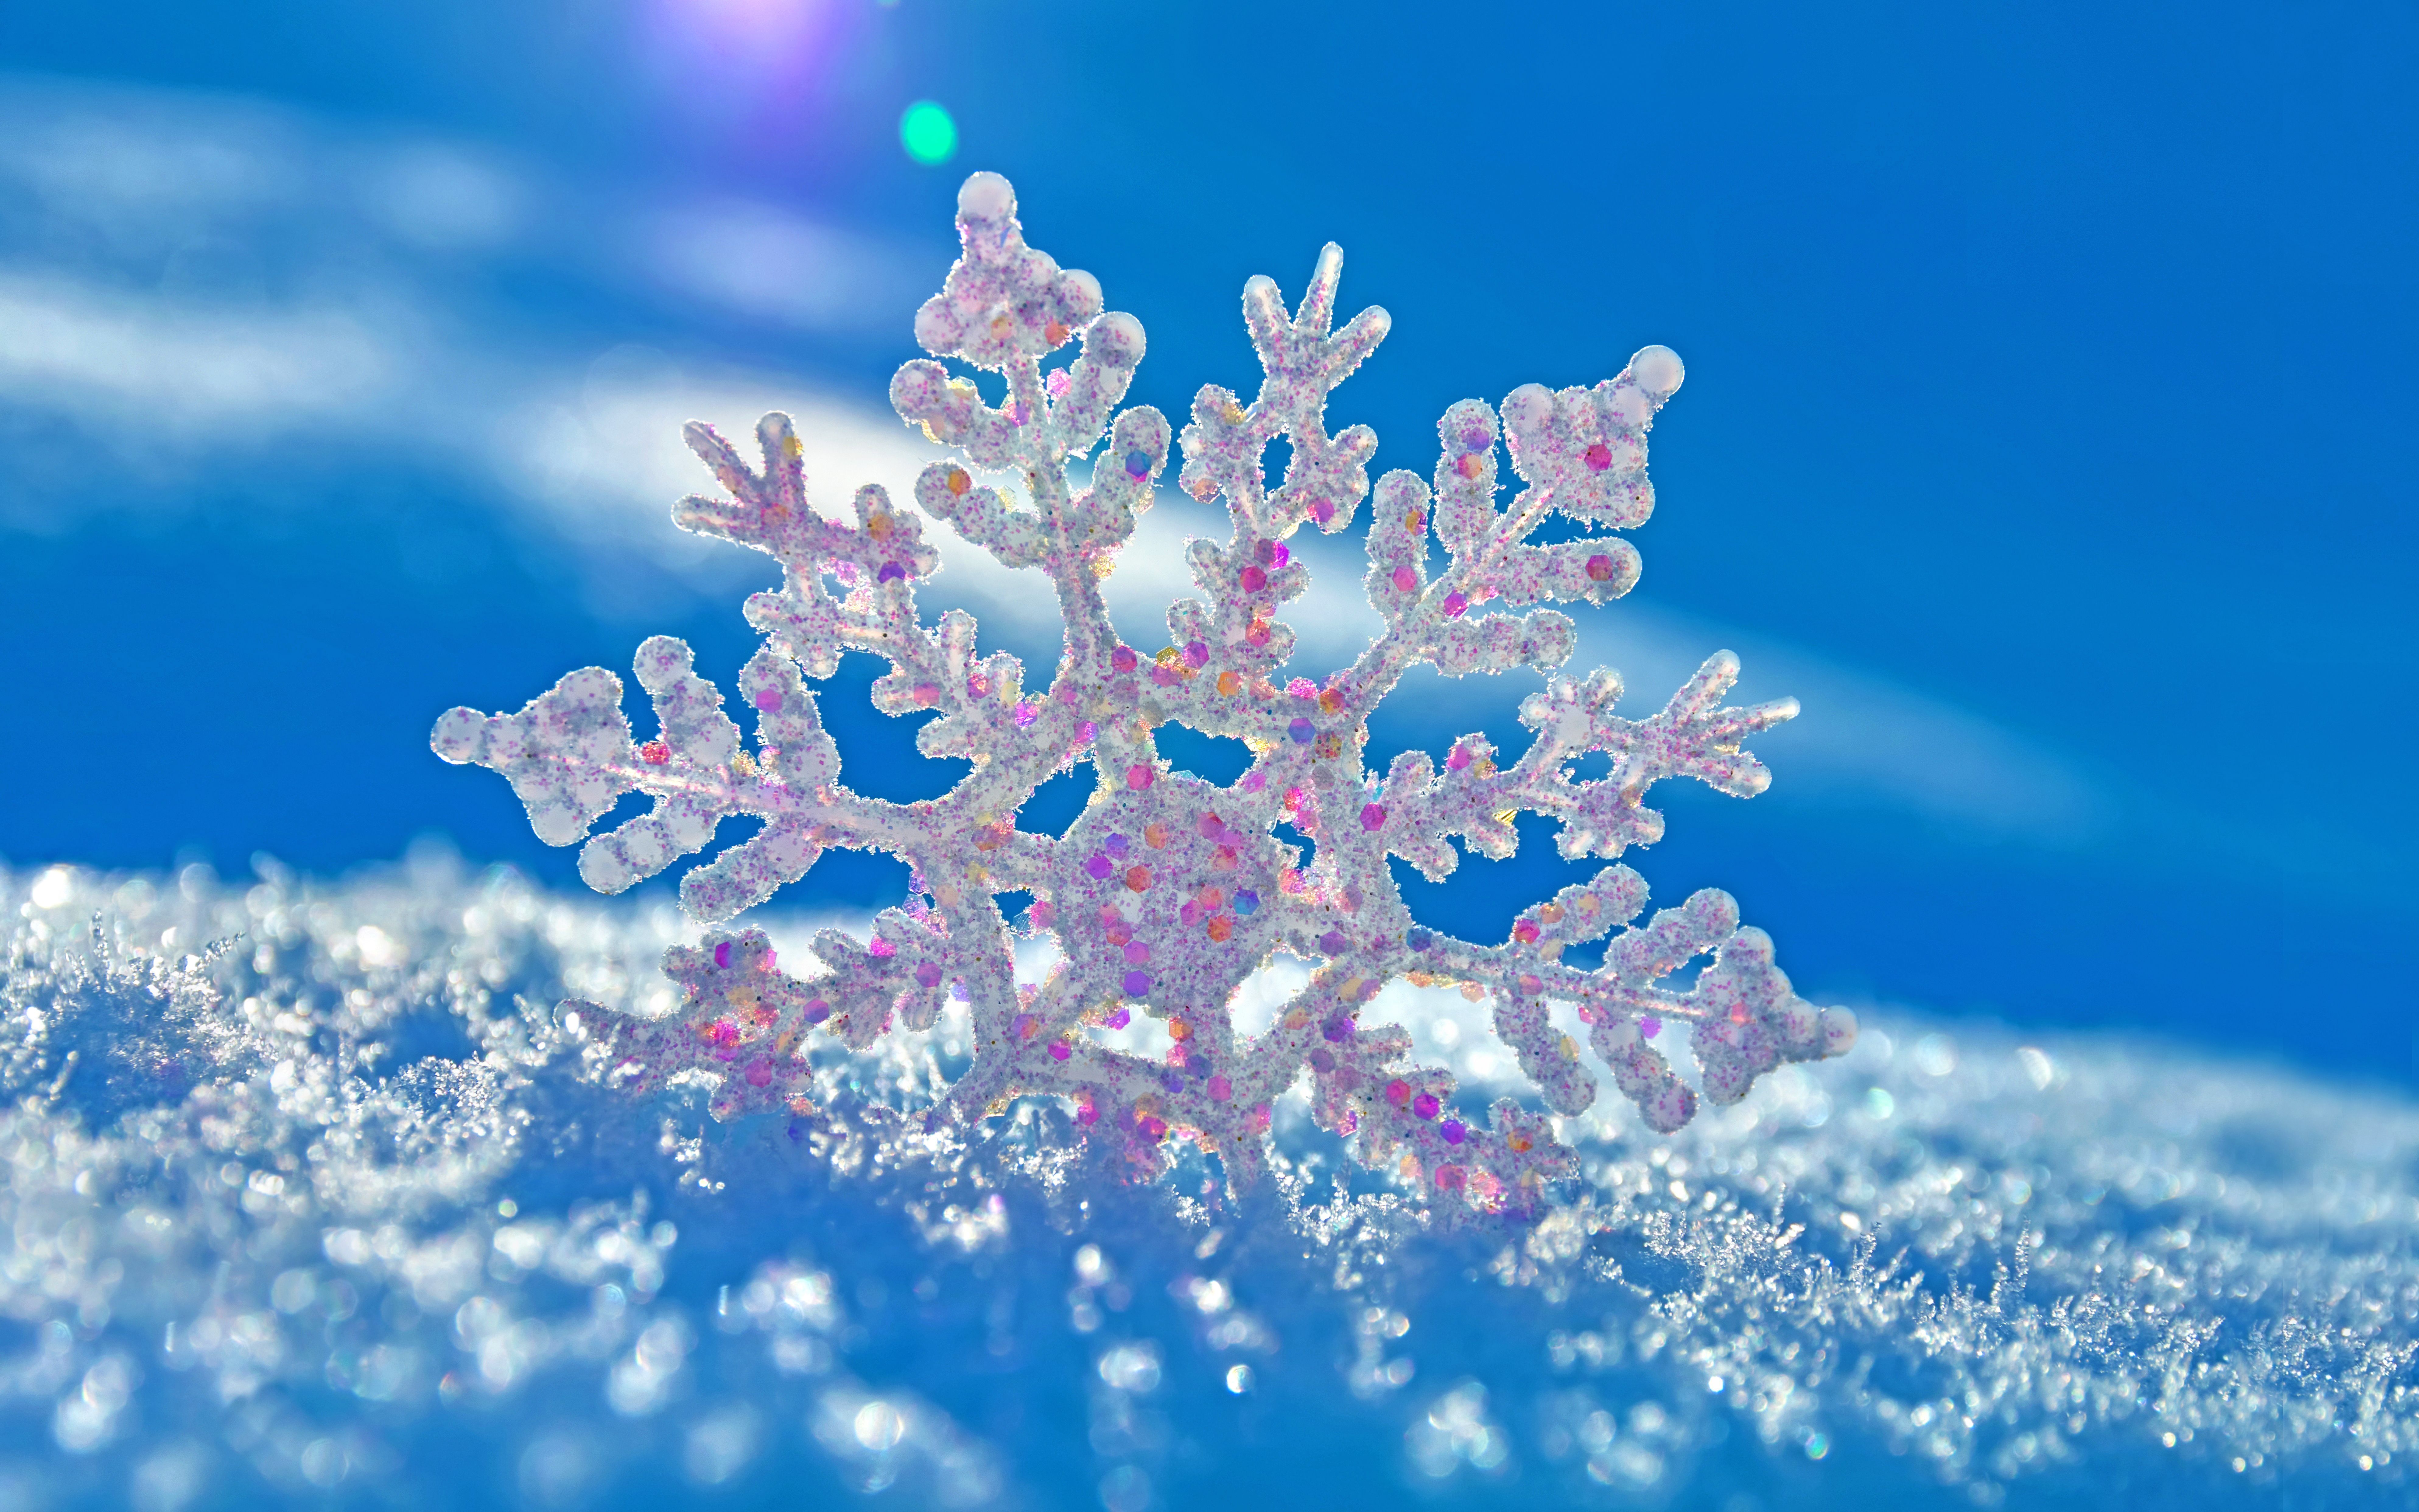 Download Snowflake wallpaper for mobile phone, free Snowflake HD picture